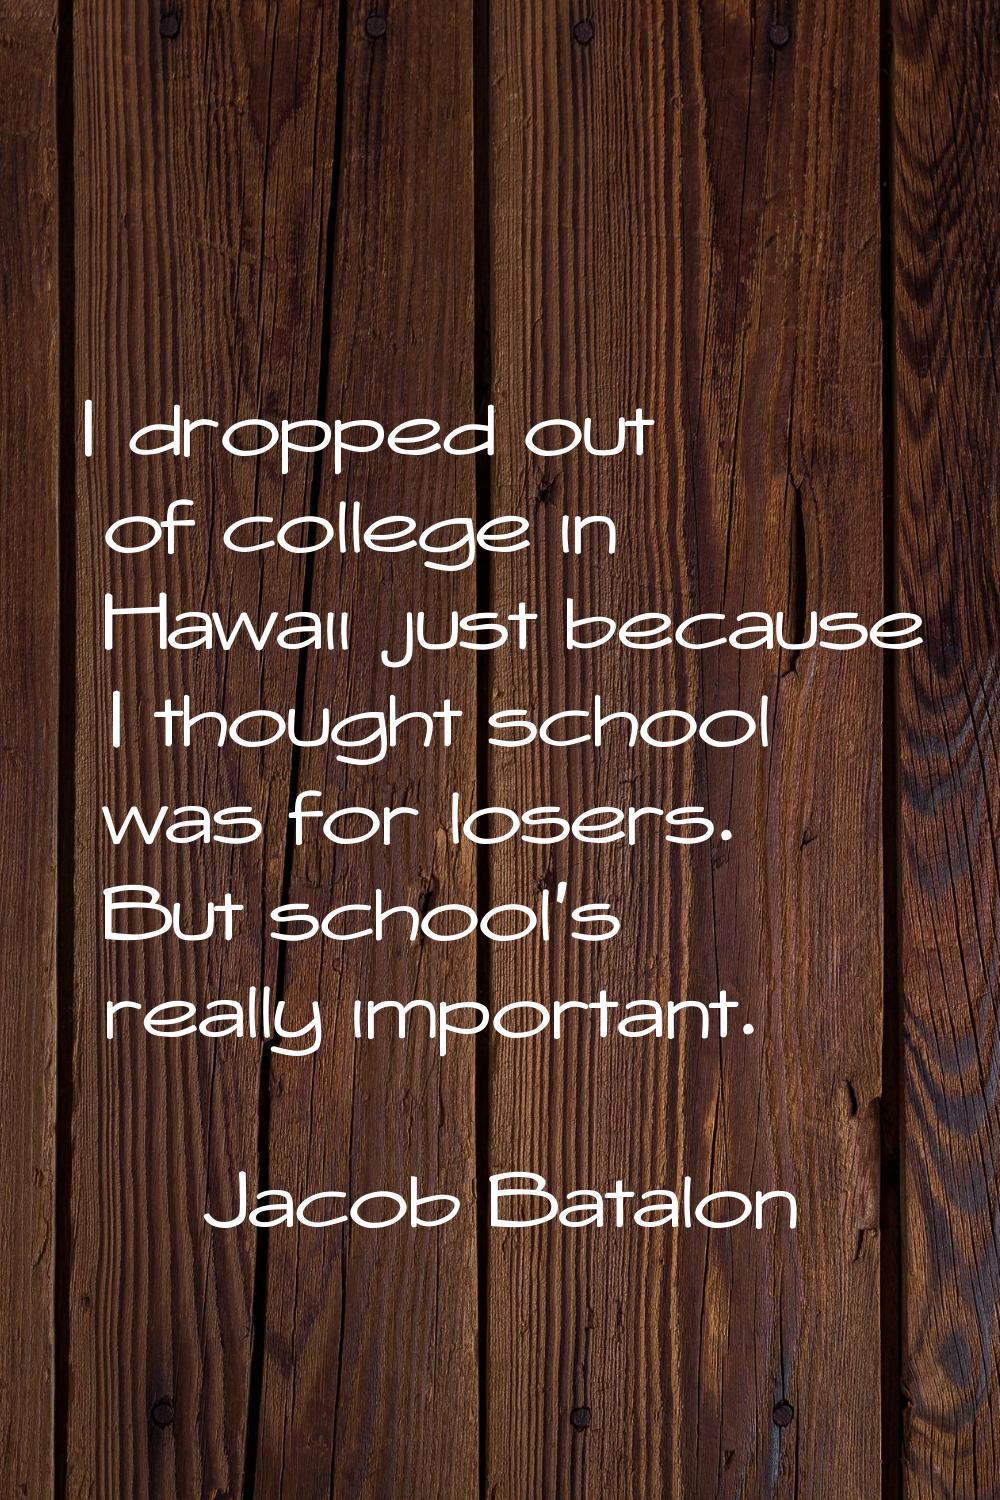 I dropped out of college in Hawaii just because I thought school was for losers. But school's reall